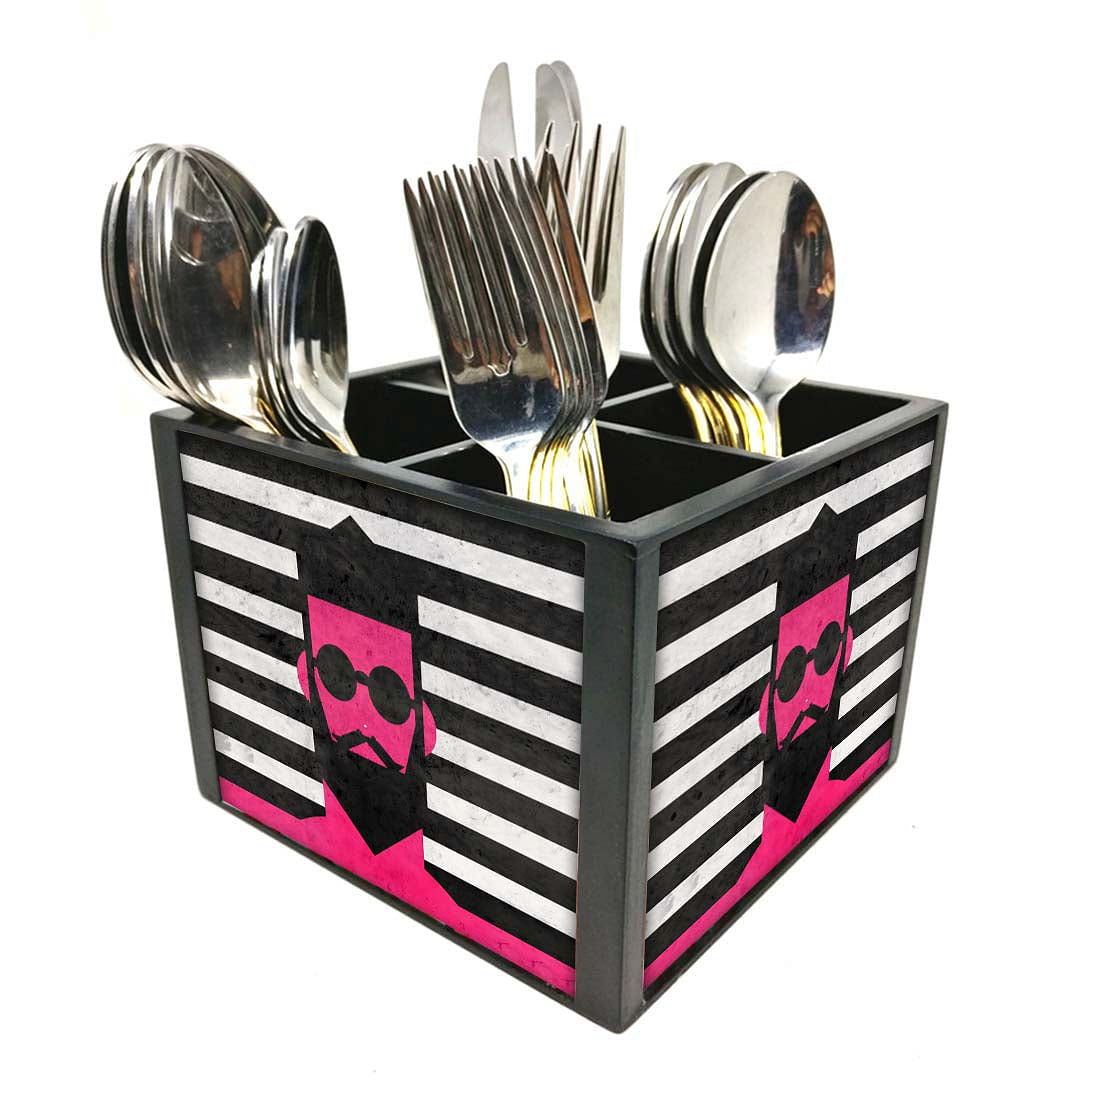 Dude Cutlery Holder Stand Silverware Caddy Organizer for Spoons, Forks & Knives-Made of Pinewood Nutcase